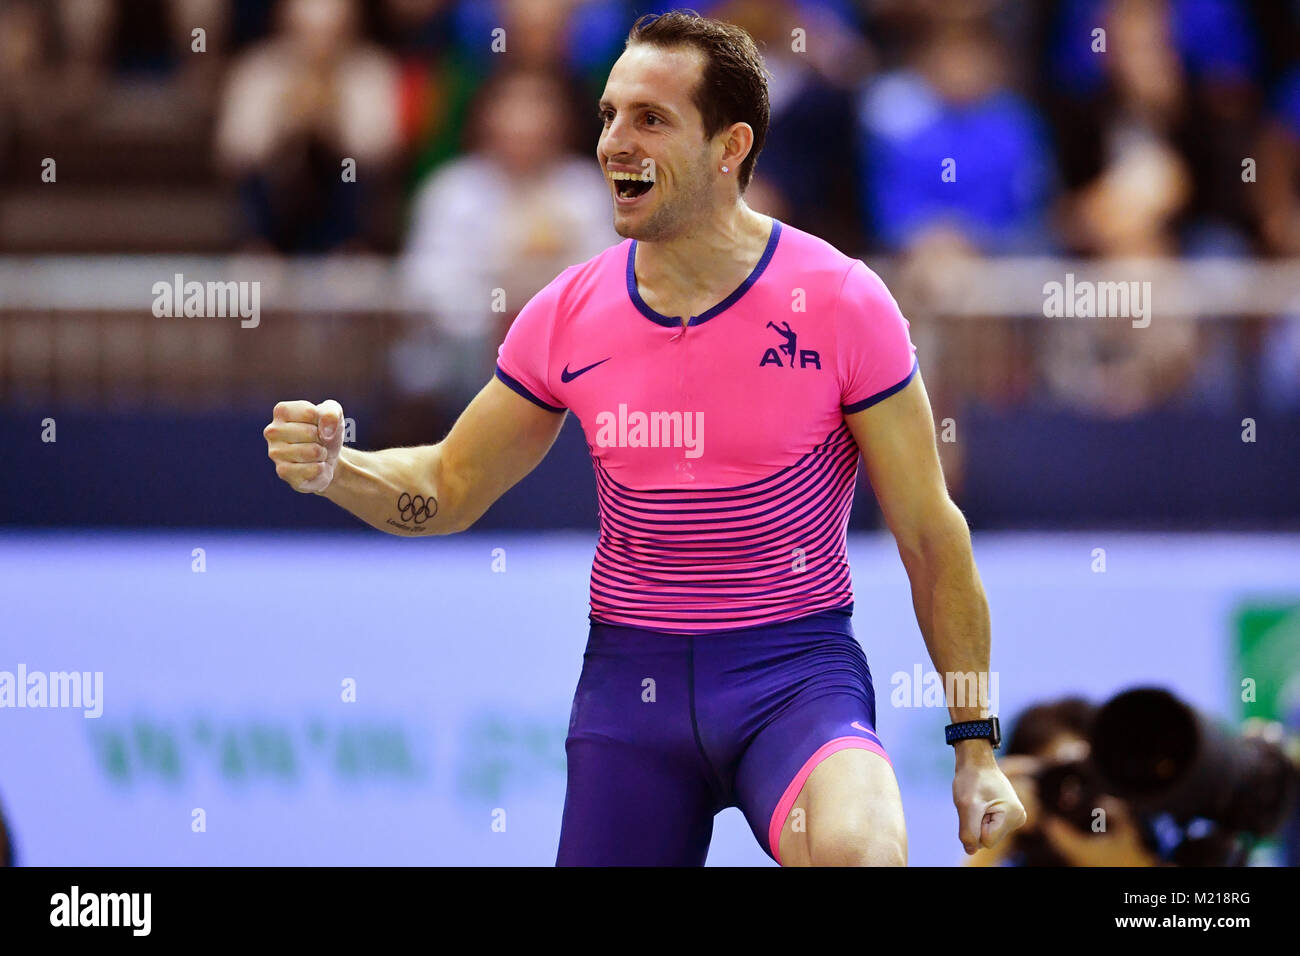 Renaud Lavillenie : Valentin And Renaud Lavillenie Track And Field Pole Vault Athlete : Renaud lavillenie and philippe d'encausse interview questions.